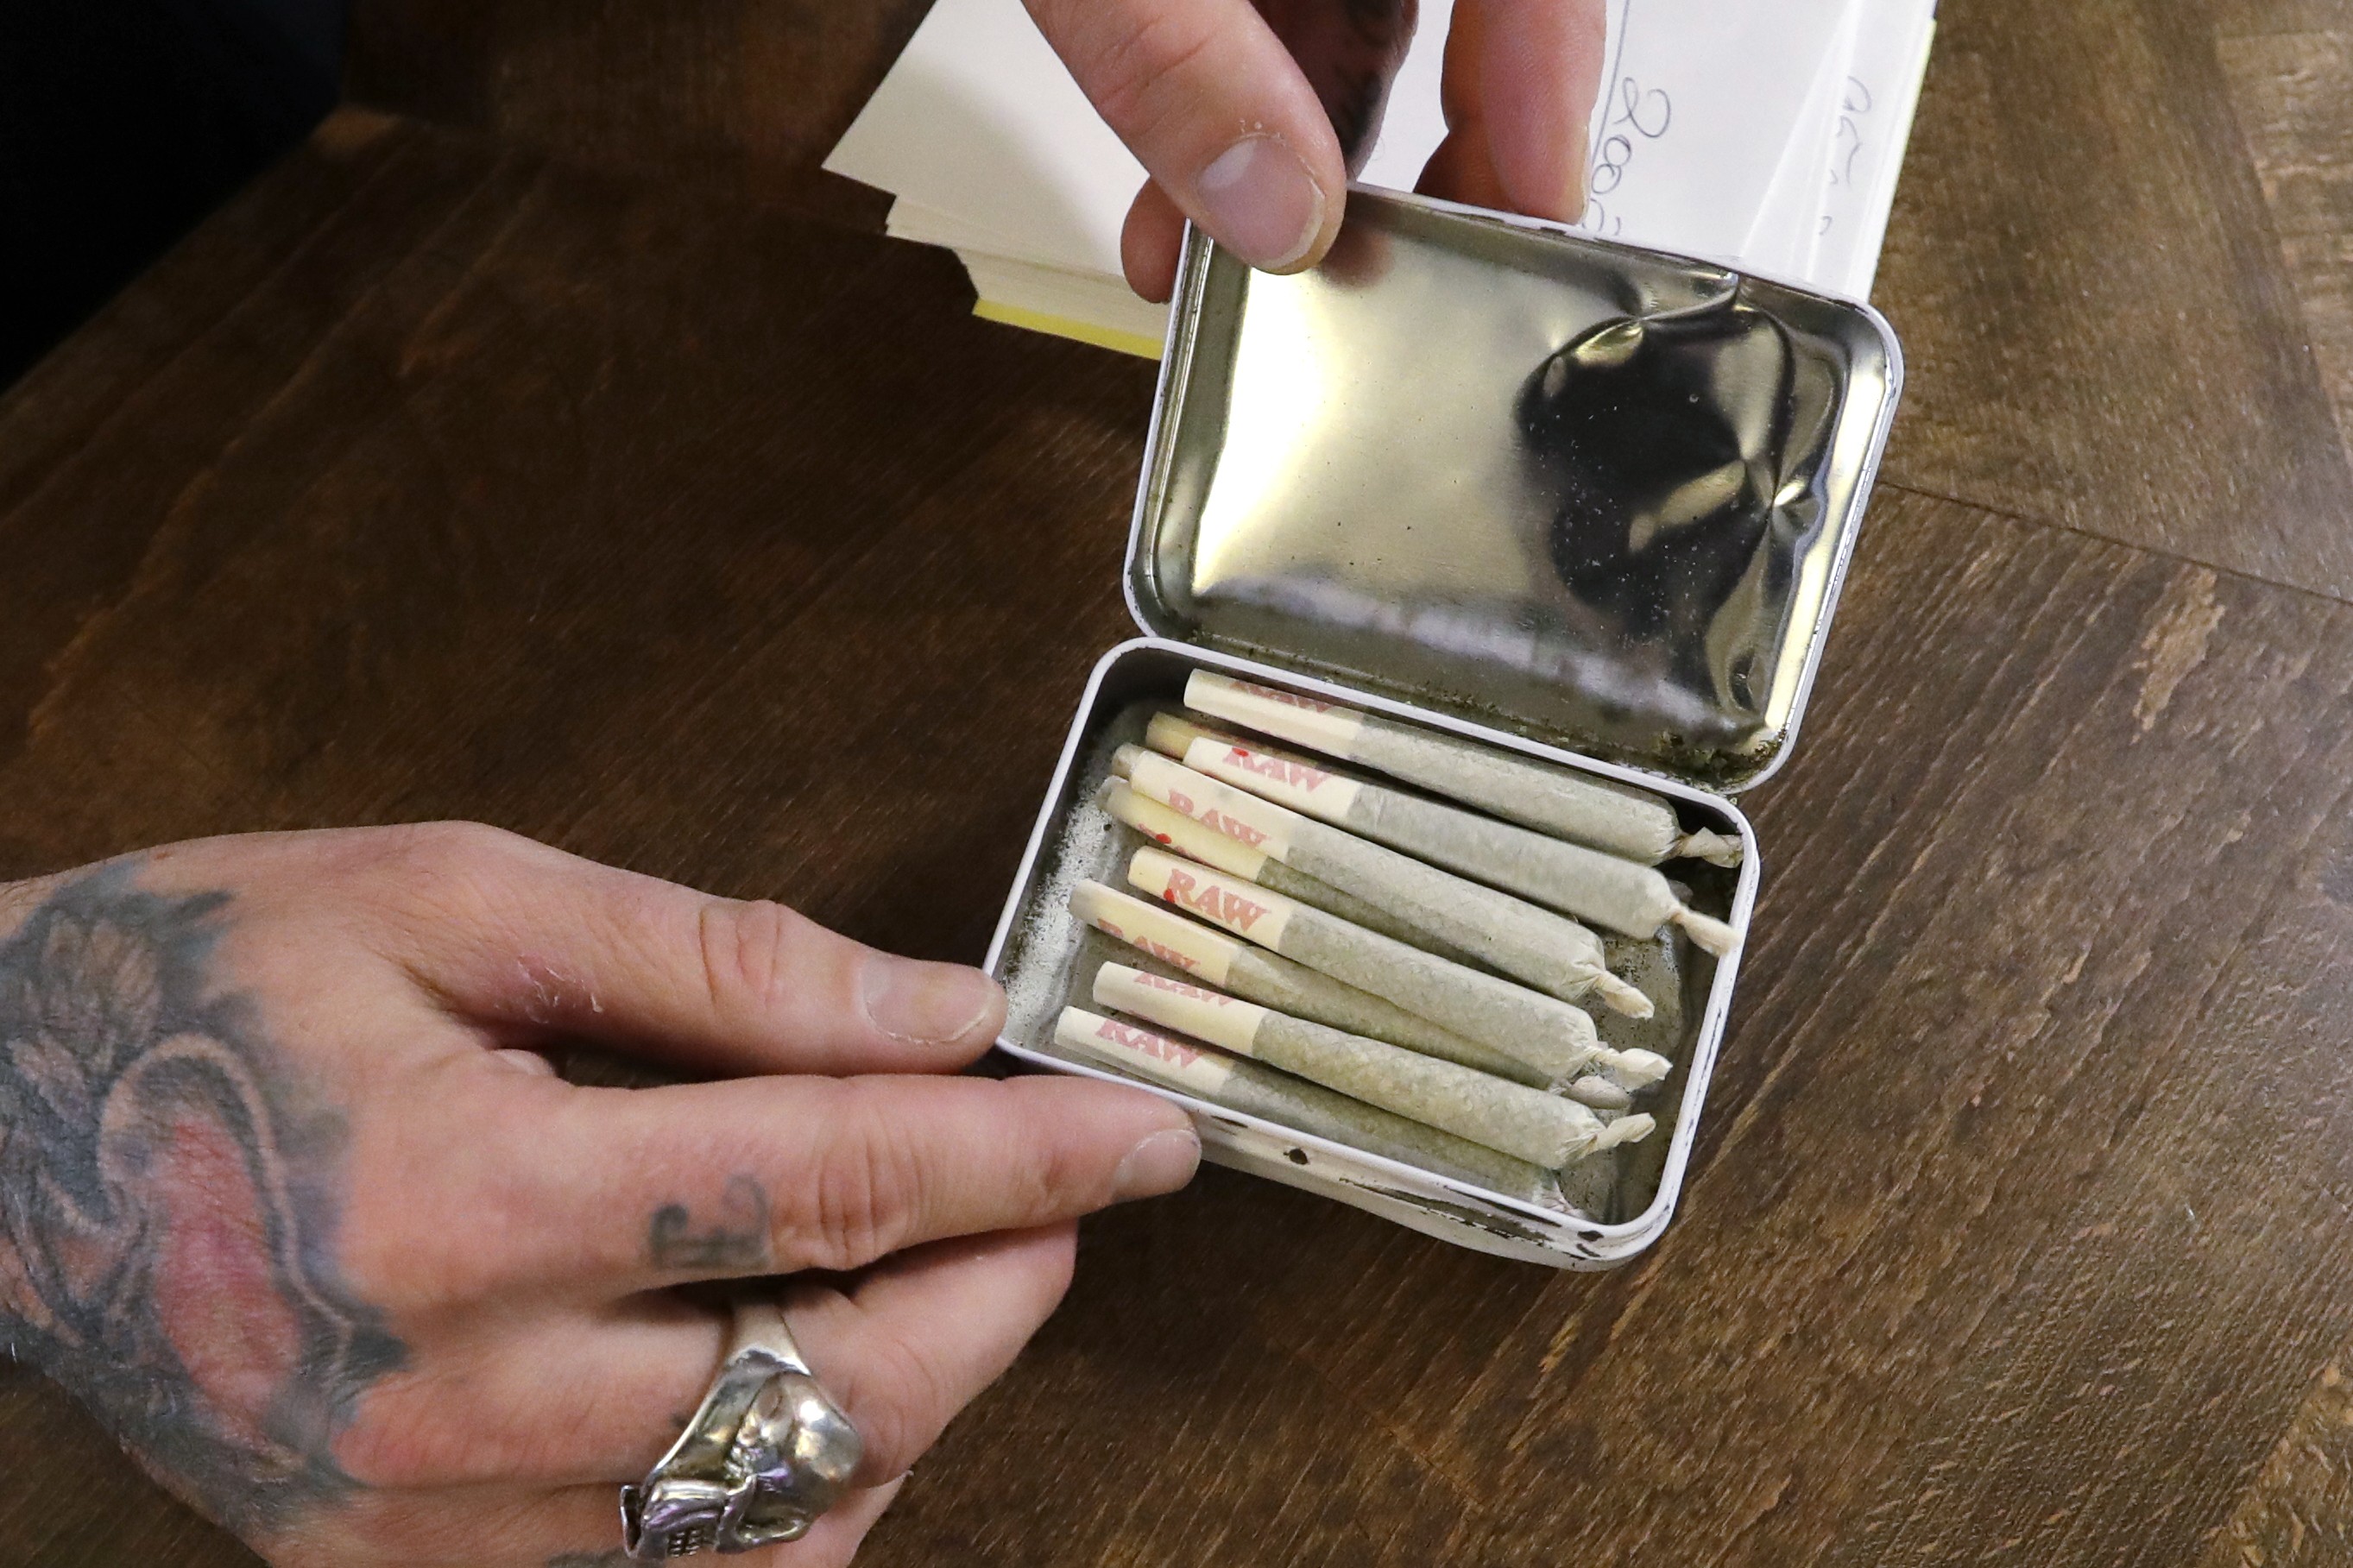 A clerk packs pre-rolled marijuana joints for a customer in Vancouver. The legalisation of cannabis abroad, in jurisdictions including Canada, is said to be encouraging Hong Kong youngsters to try the drug without fully realising the possible health consequences. Photo: AP